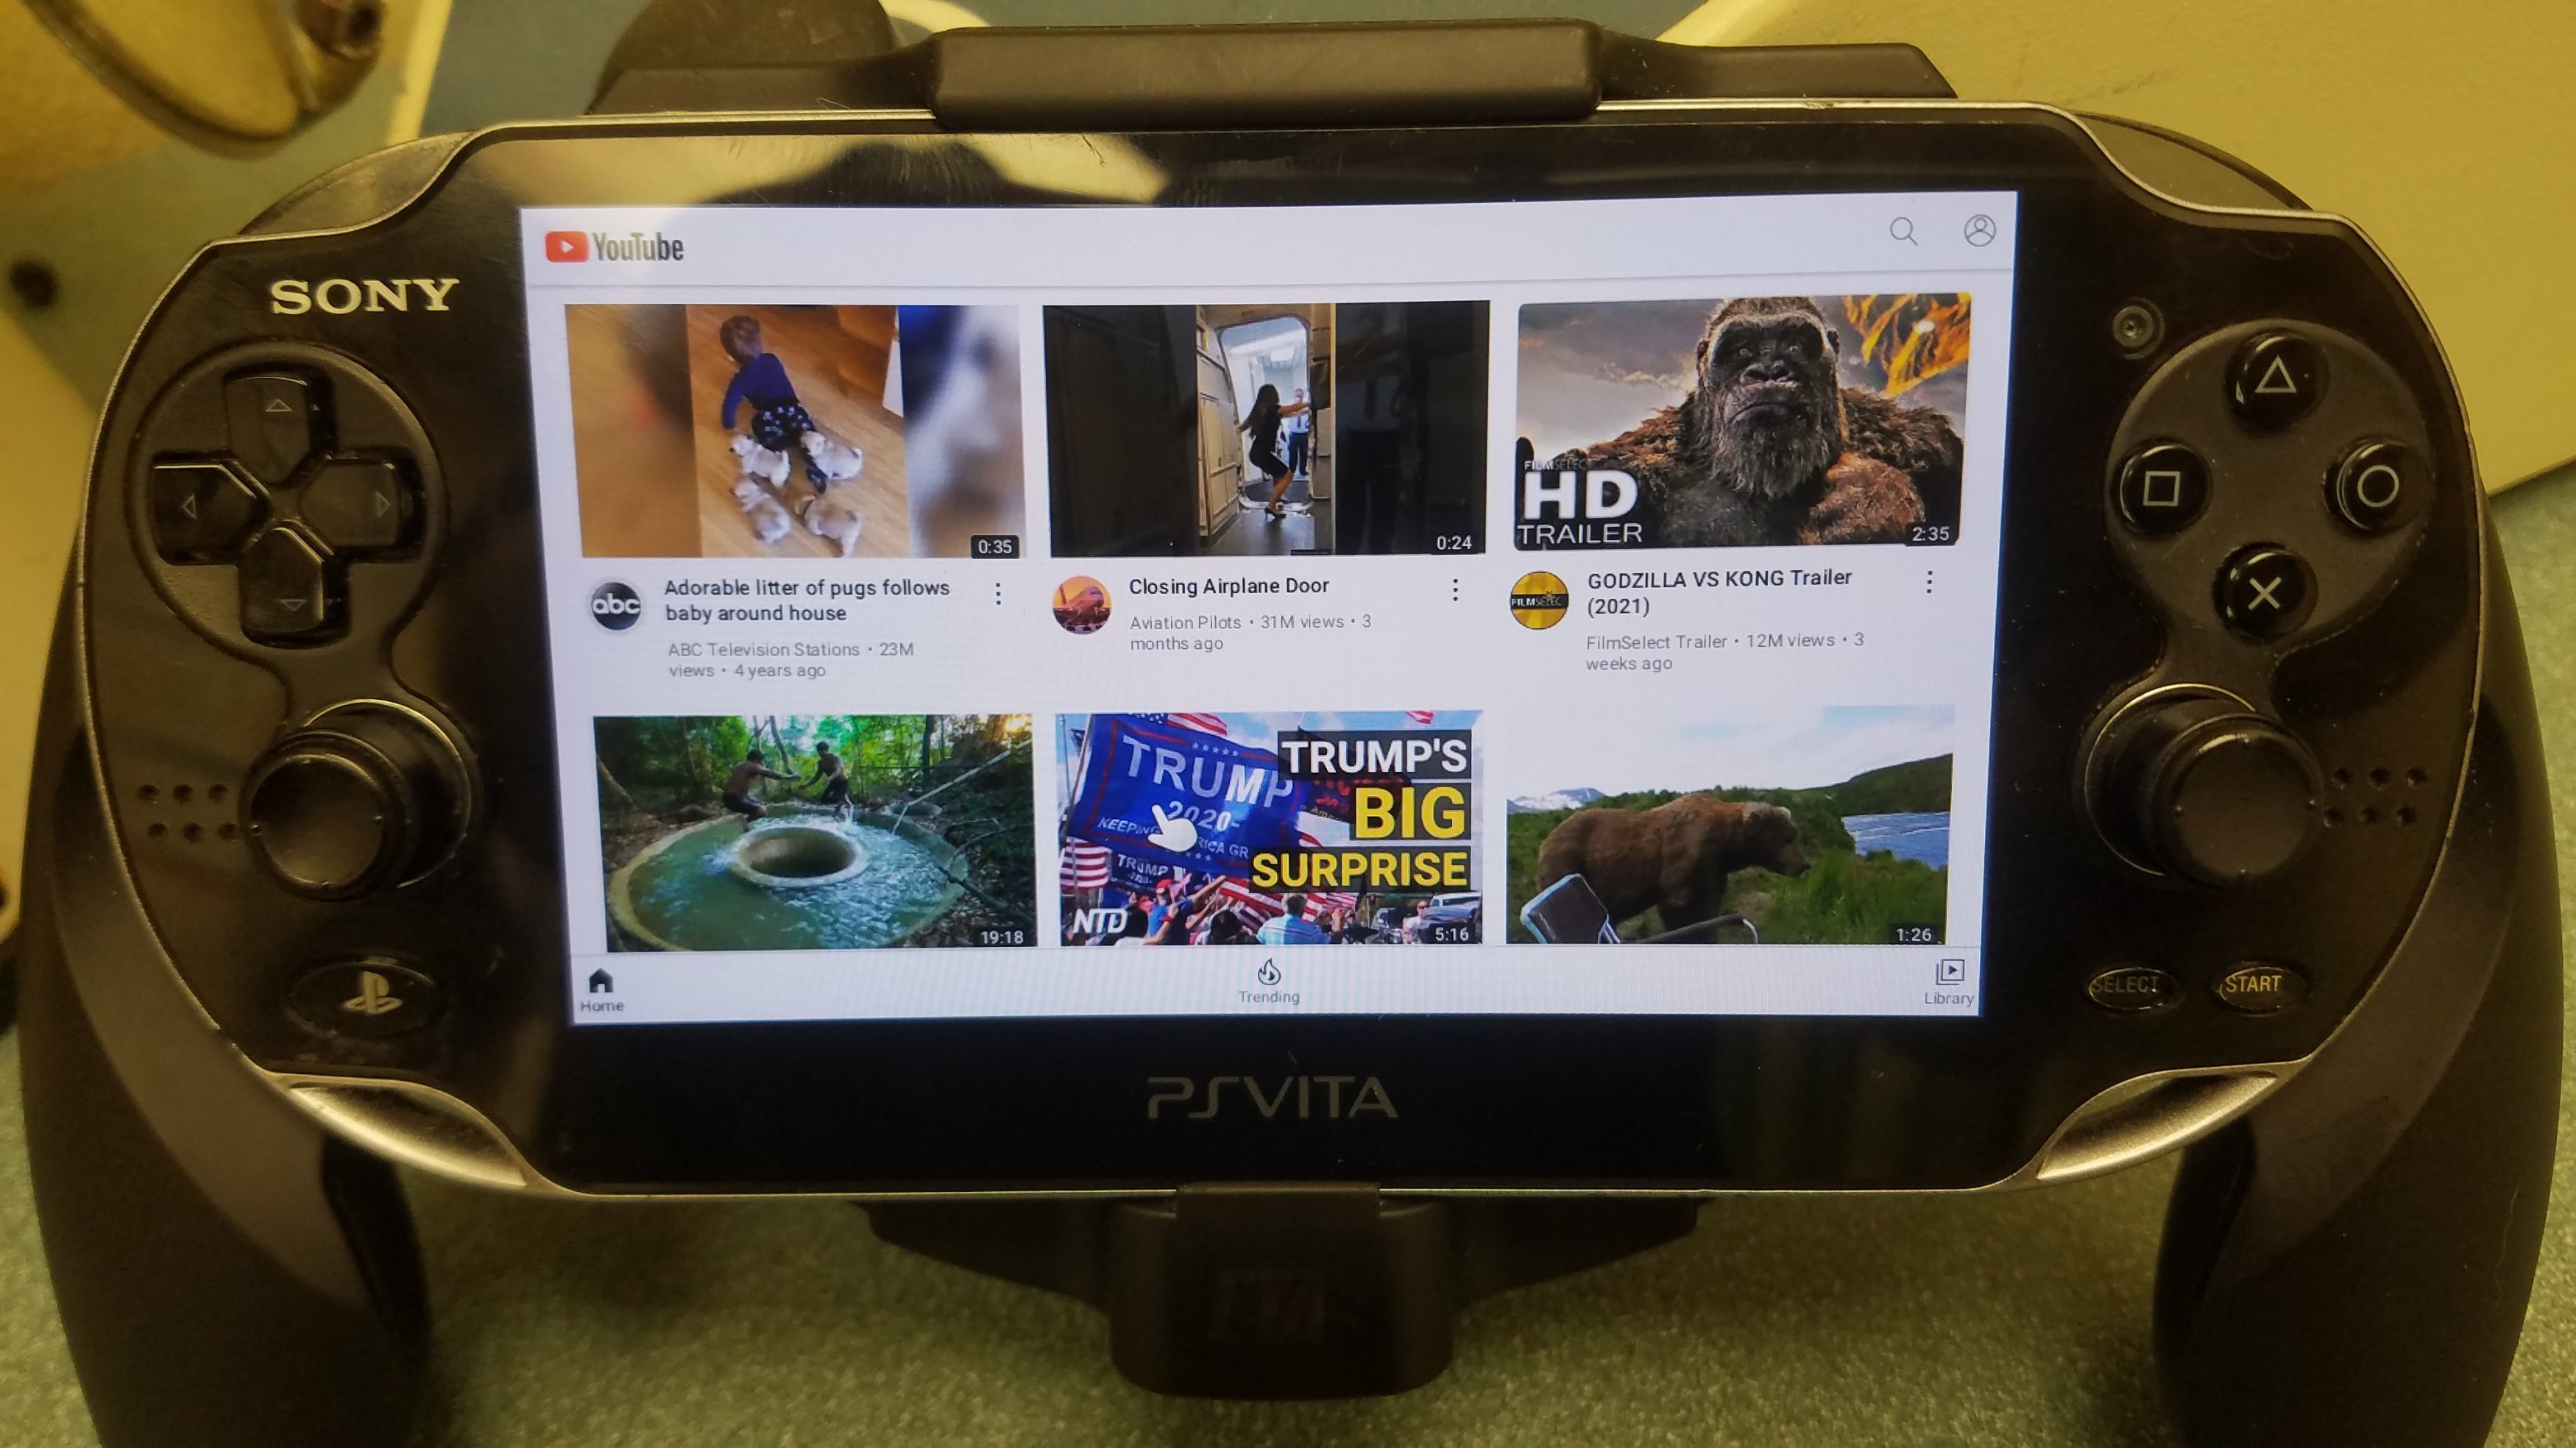 Release] CBPSTube - Unofficial Youtube Application for PS Vita |  GBAtemp.net - The Independent Video Game Community